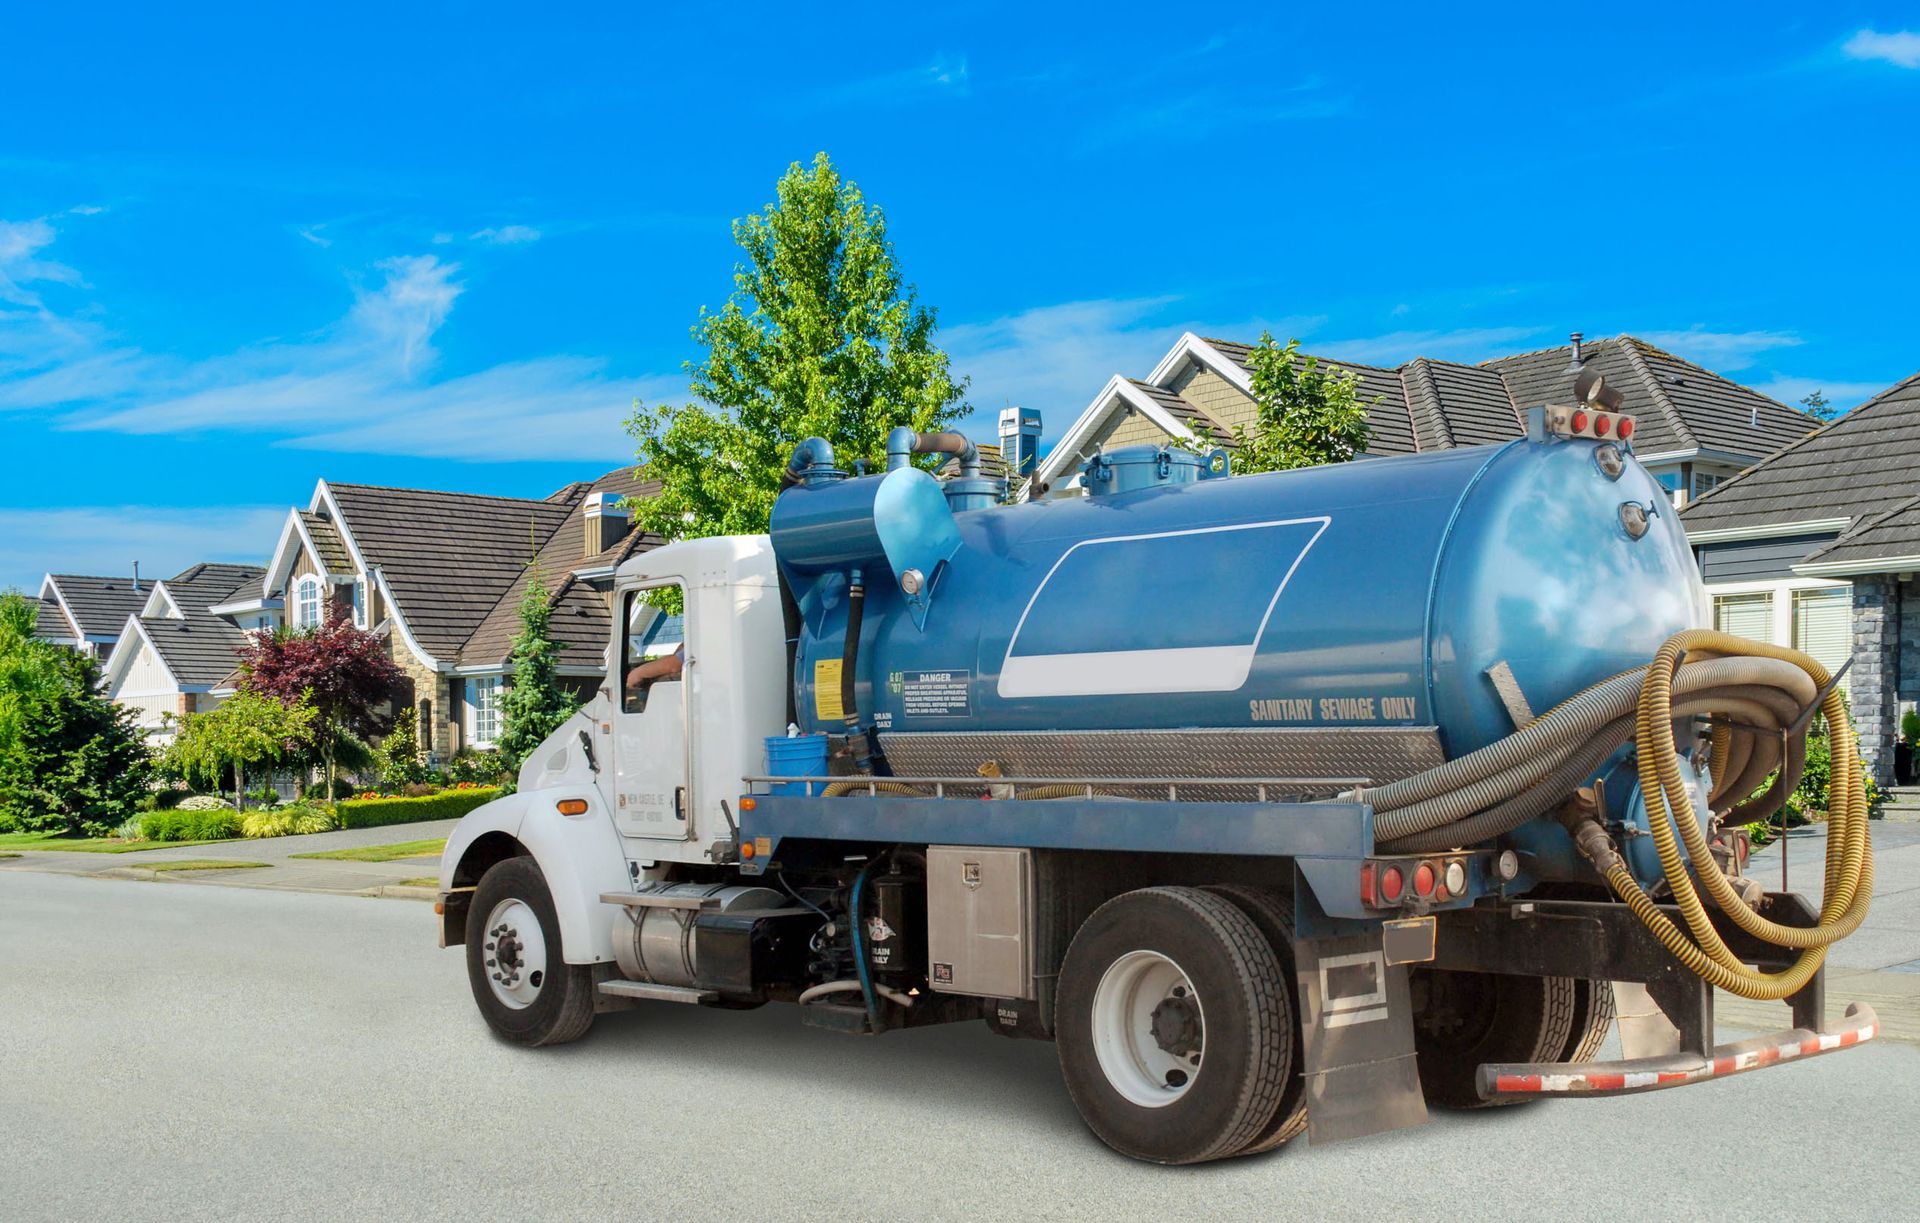 Septic system pumping companies